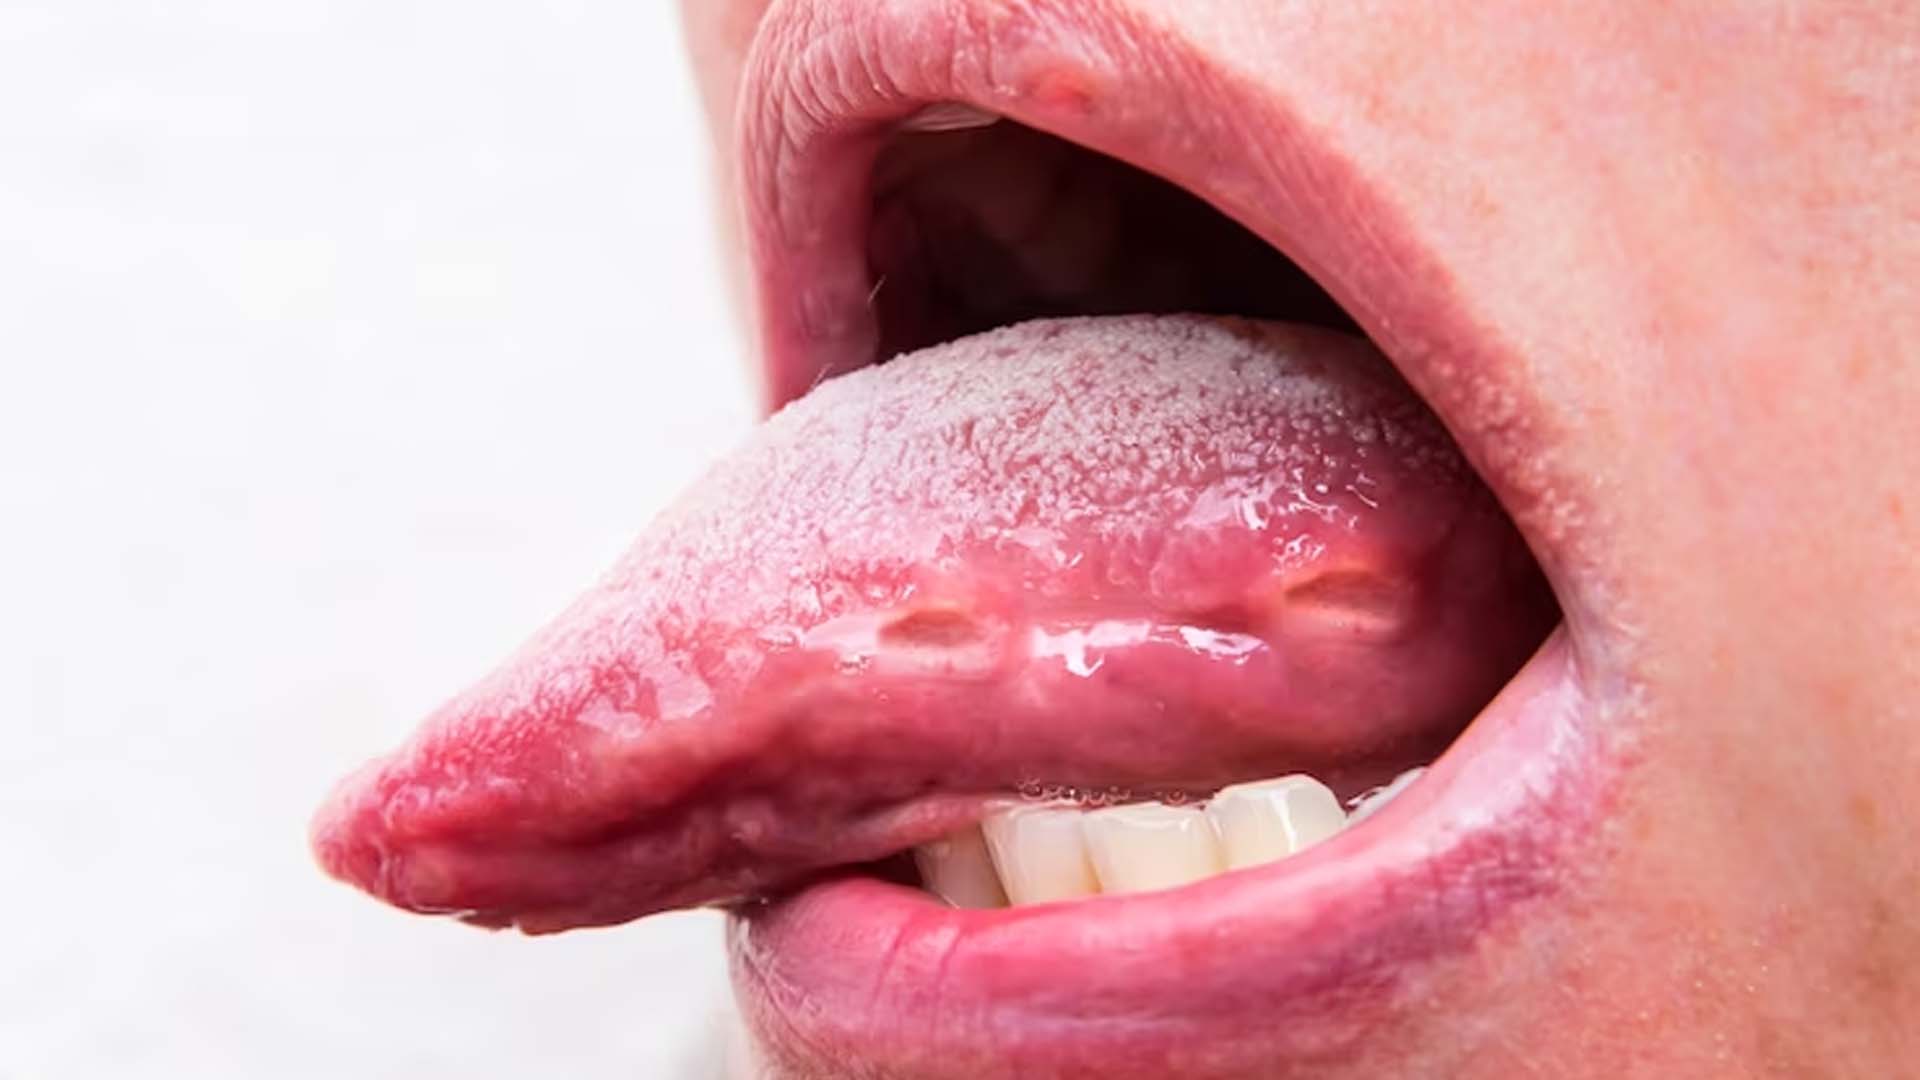 Blisters Under the Tongue